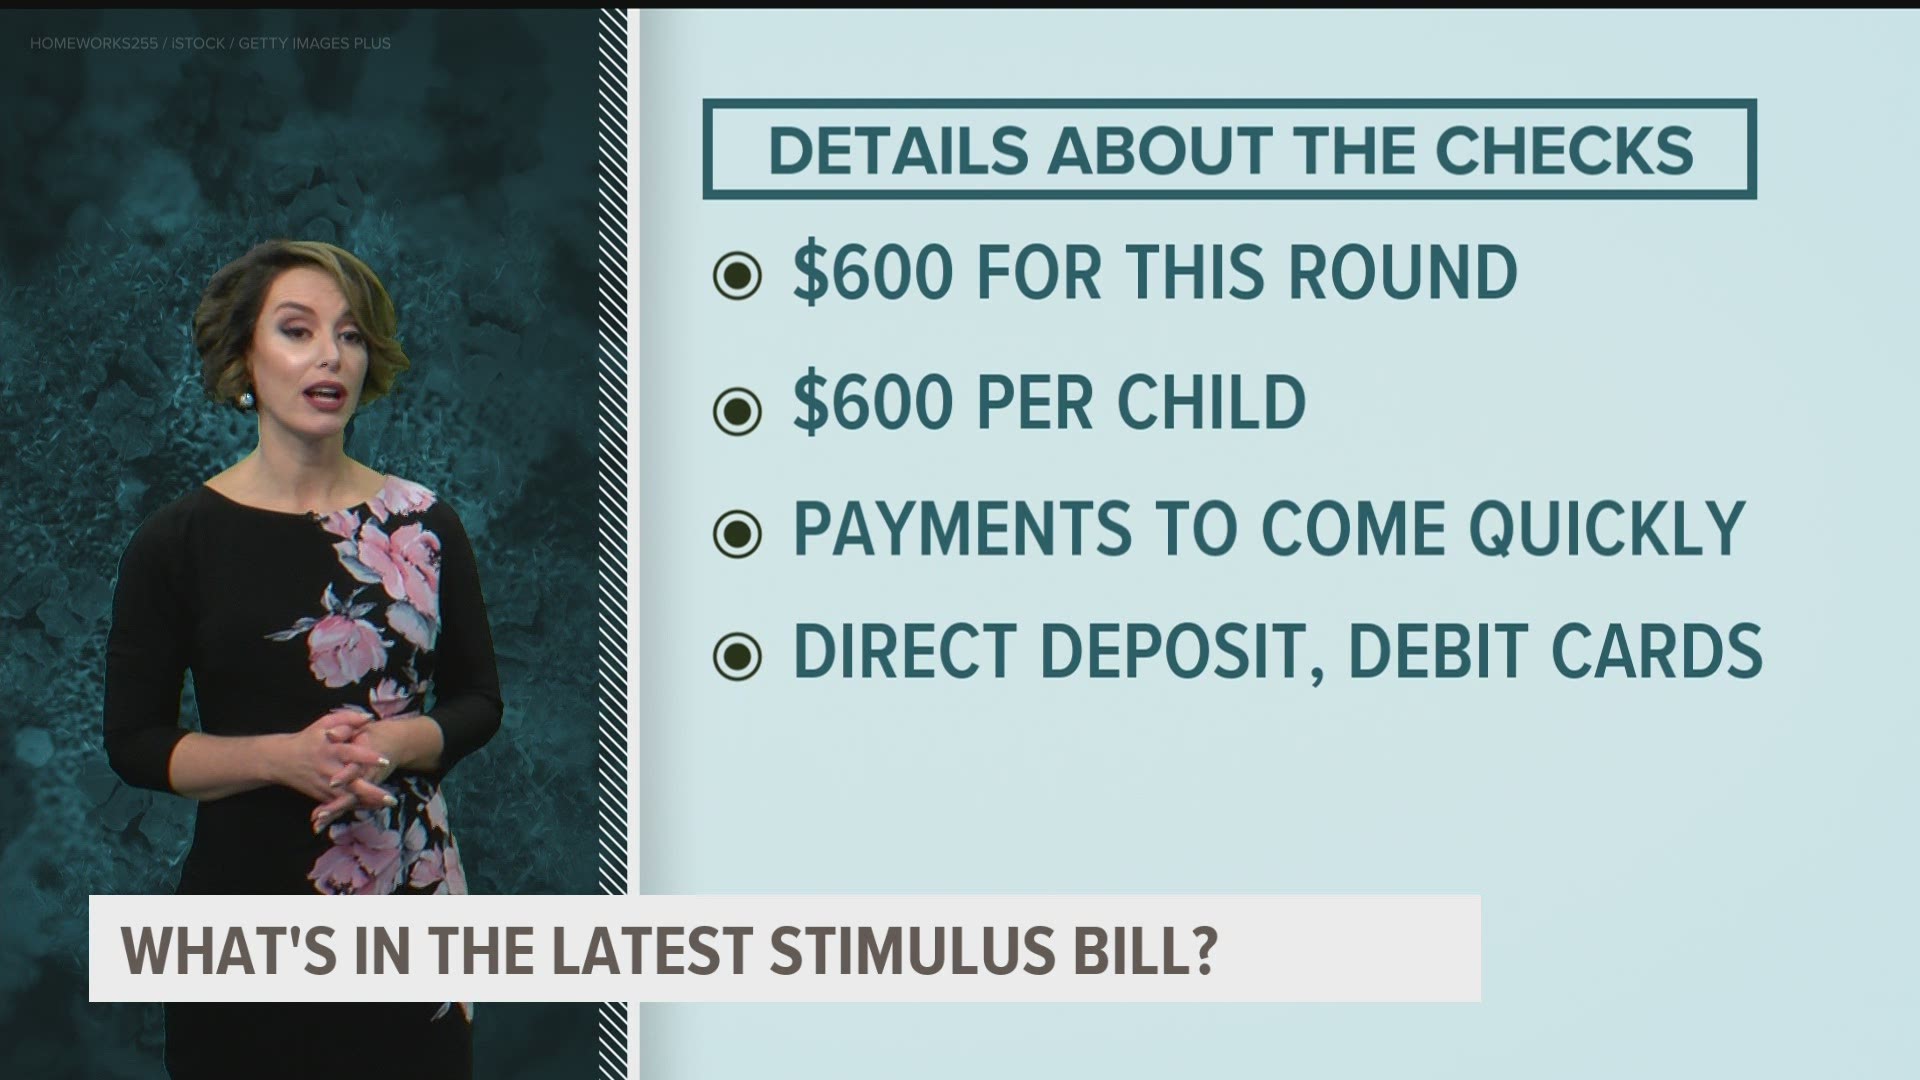 The bill includes a $600 stimulus check for many Americans.